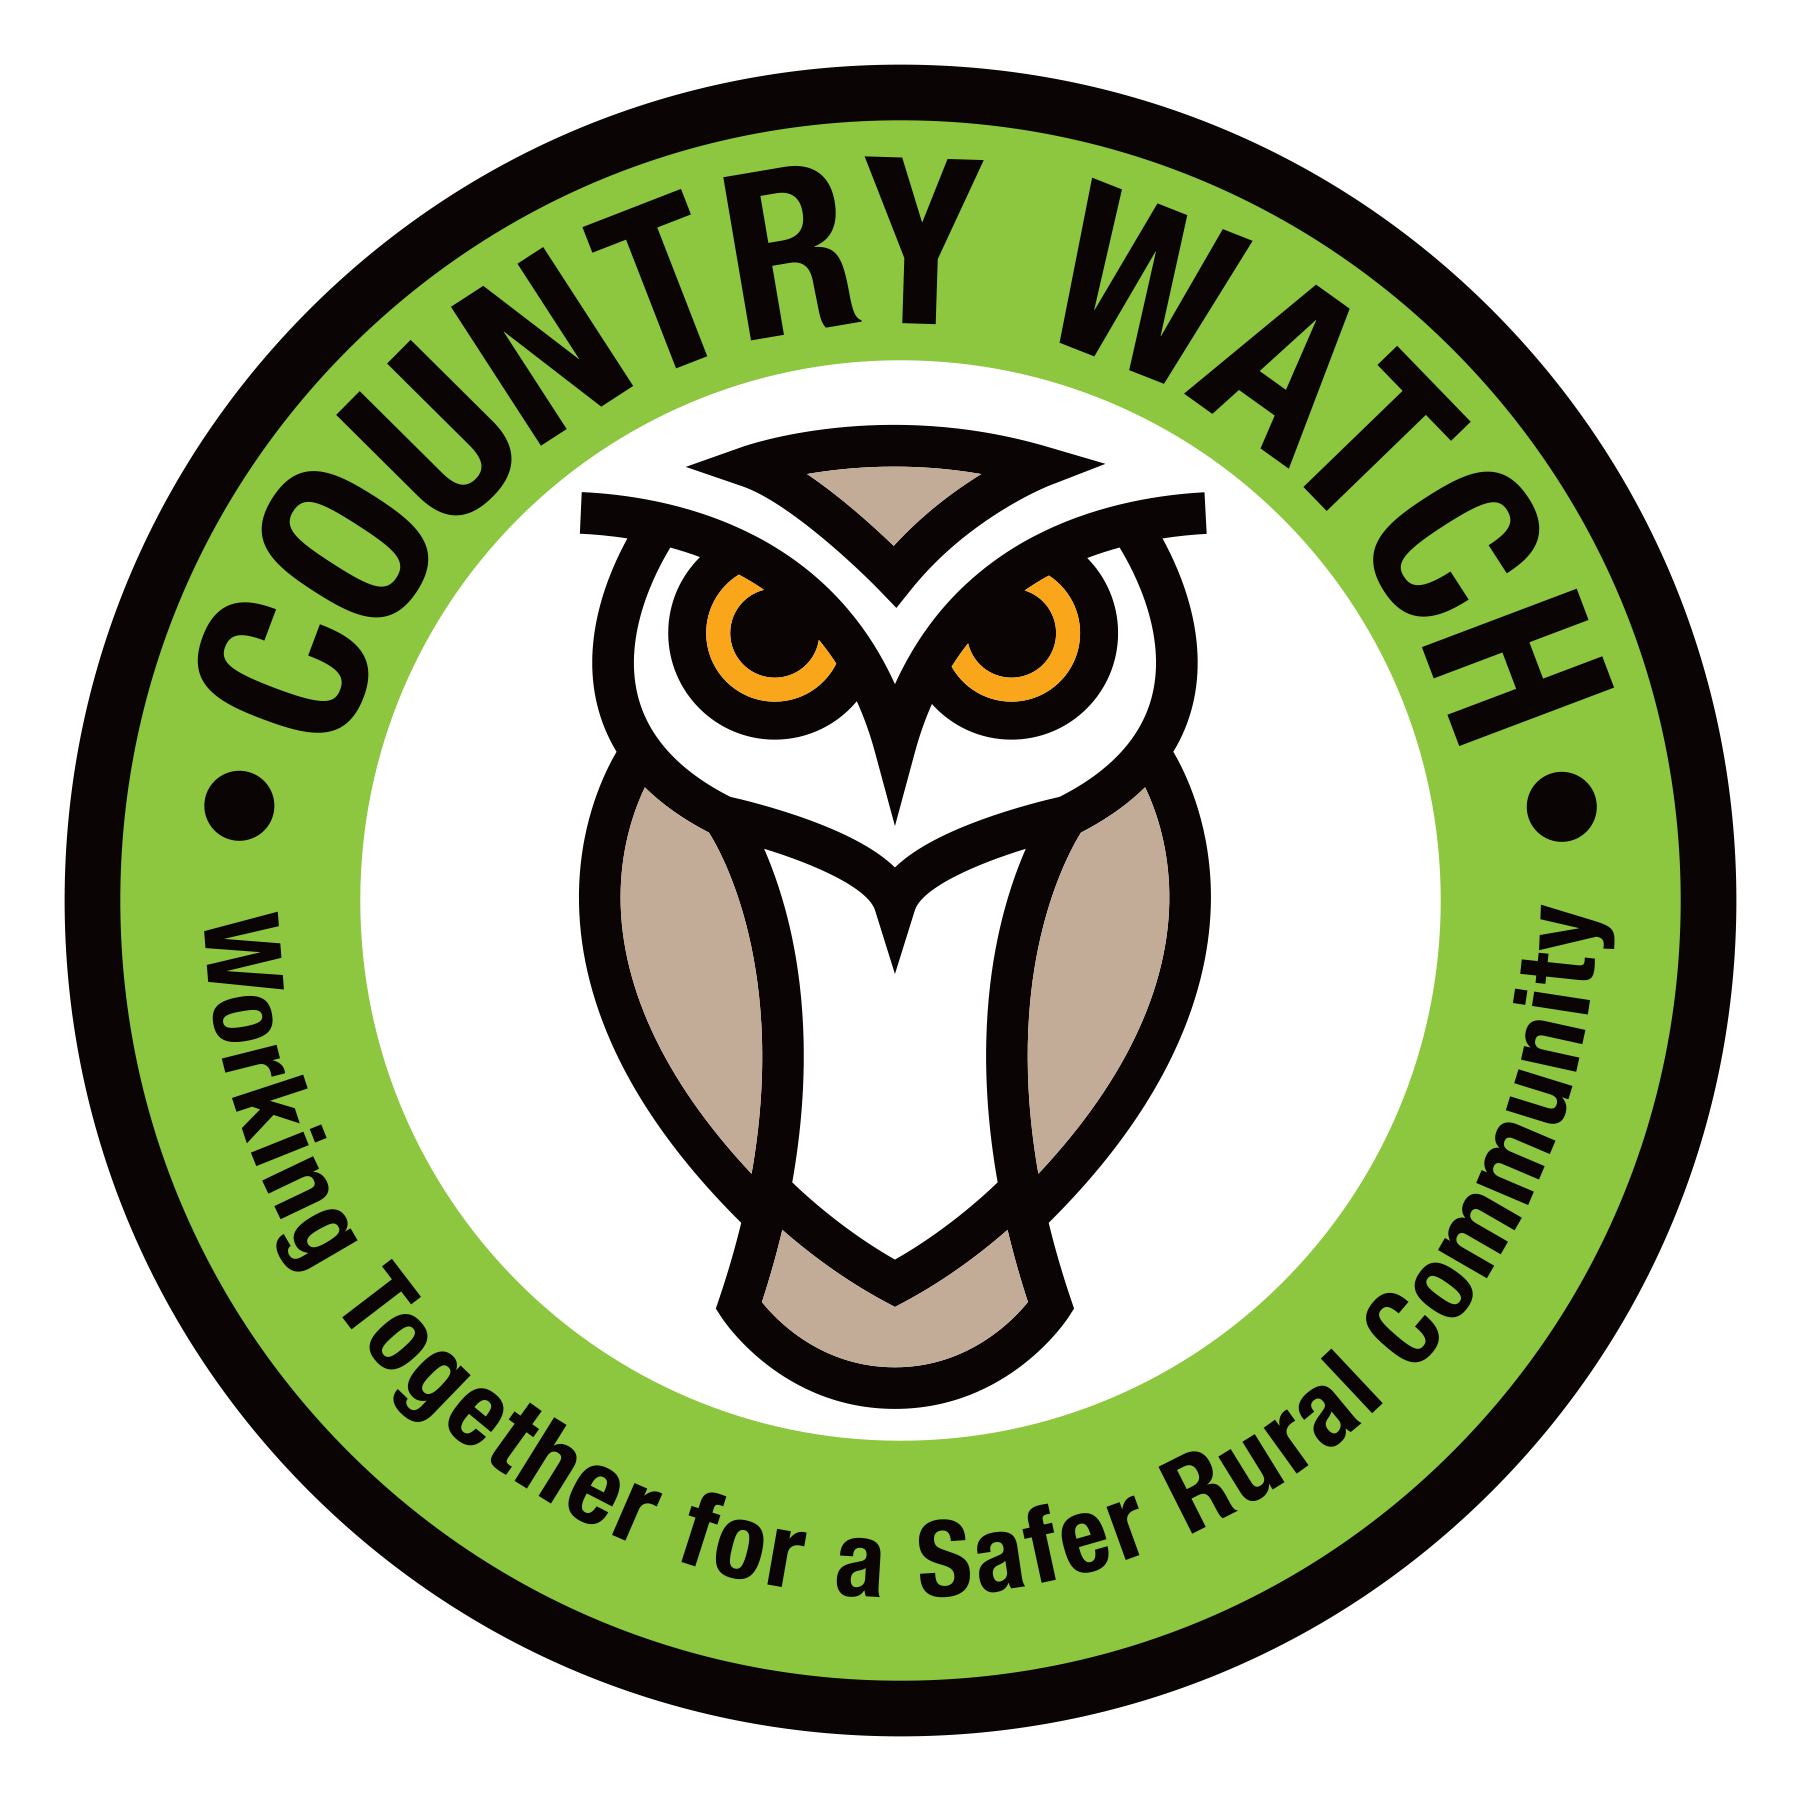 Country Watch